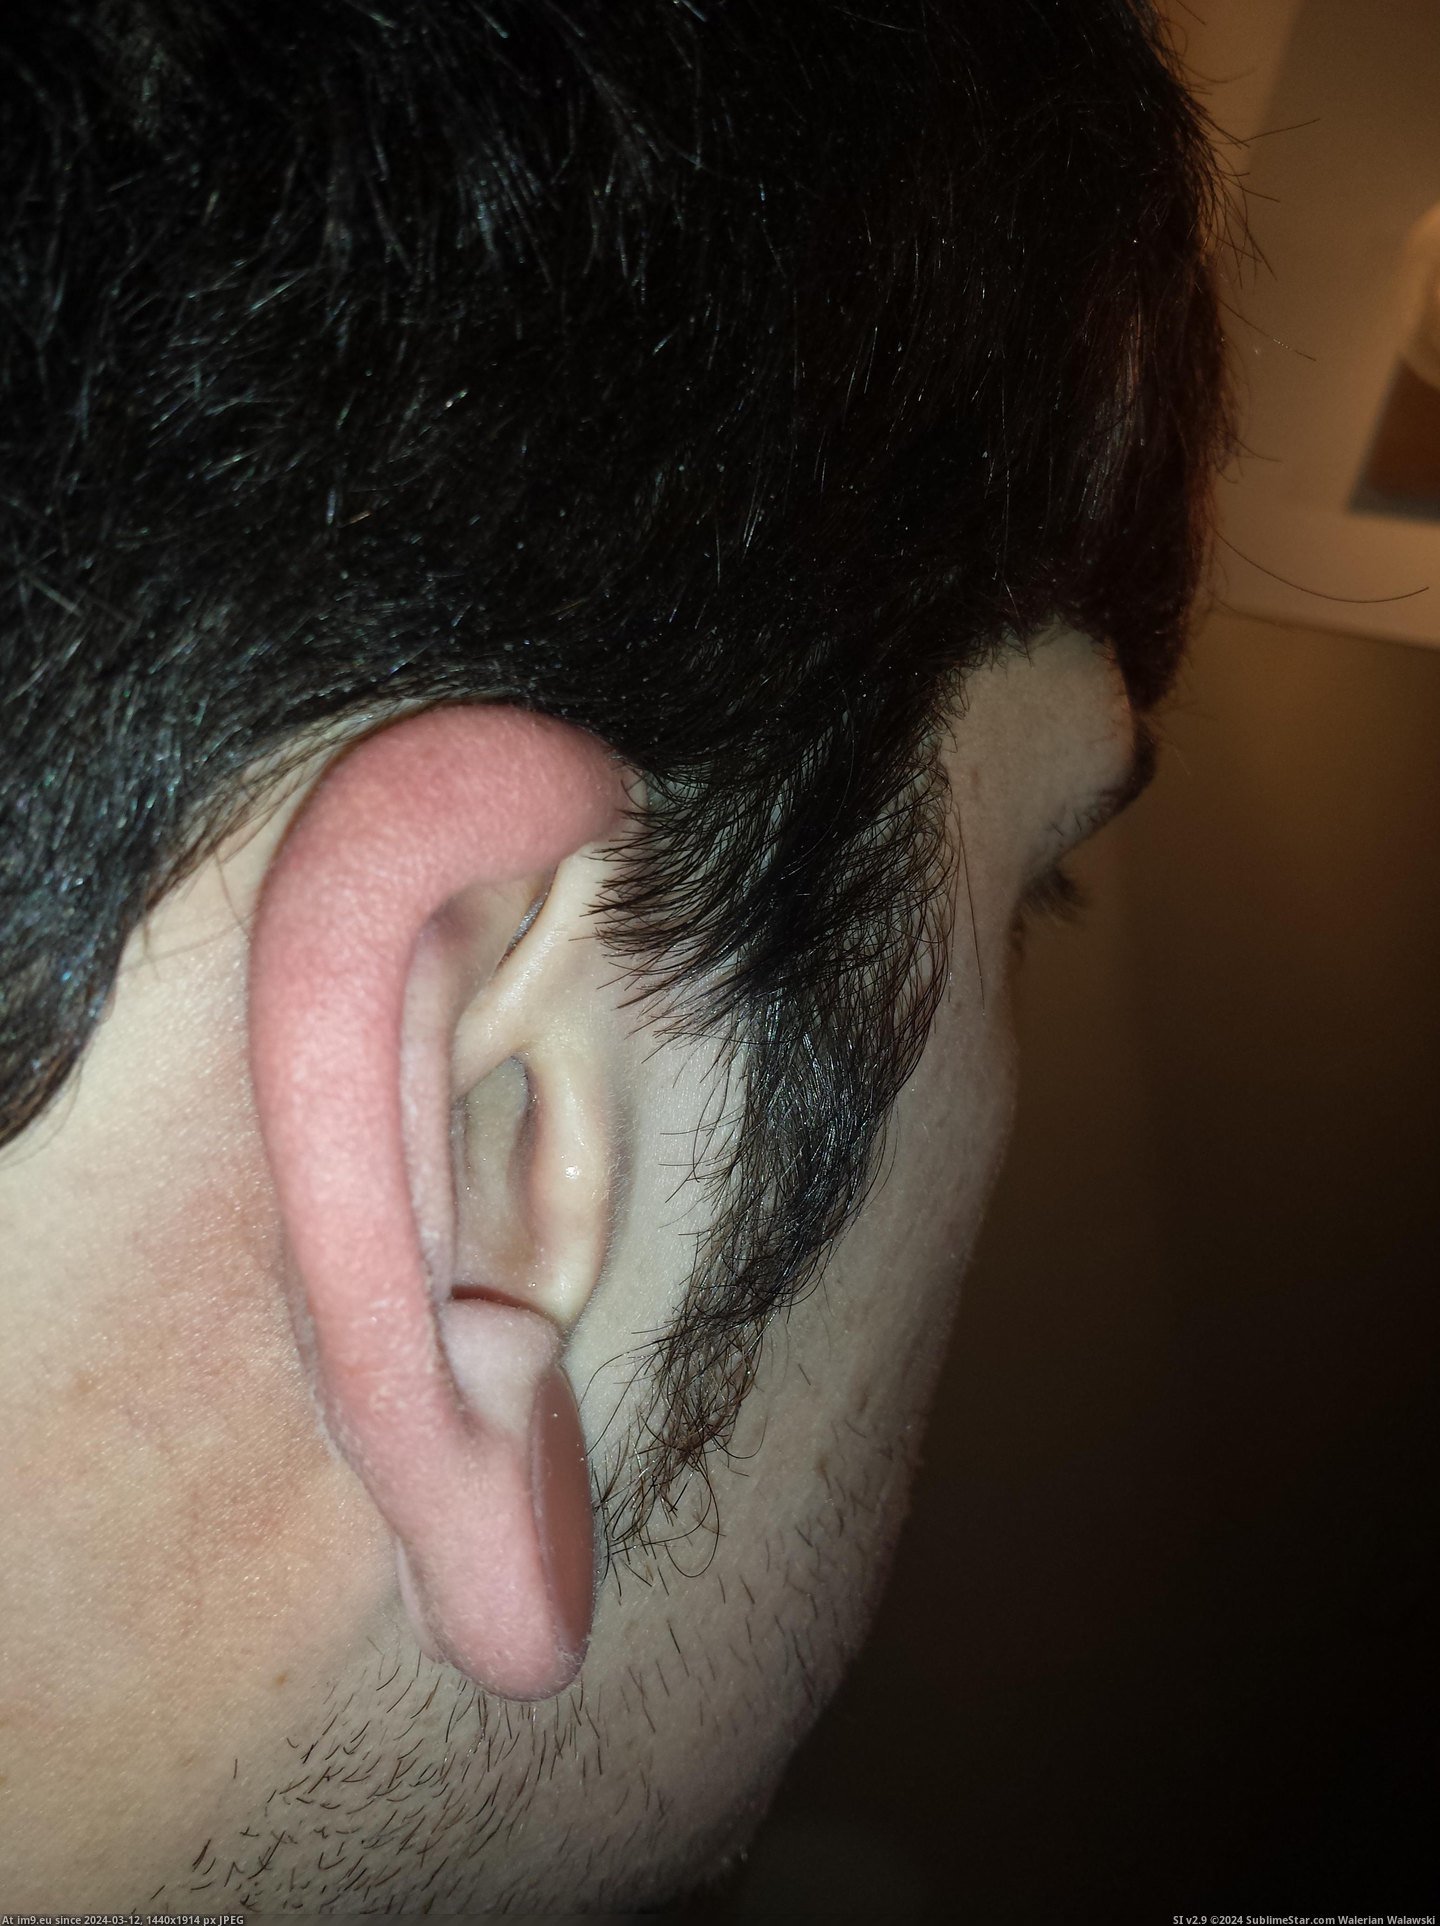 #Wtf #Ear #Infection #Crazy [Wtf] My crazy ear infection 12 Pic. (Изображение из альбом My r/WTF favs))